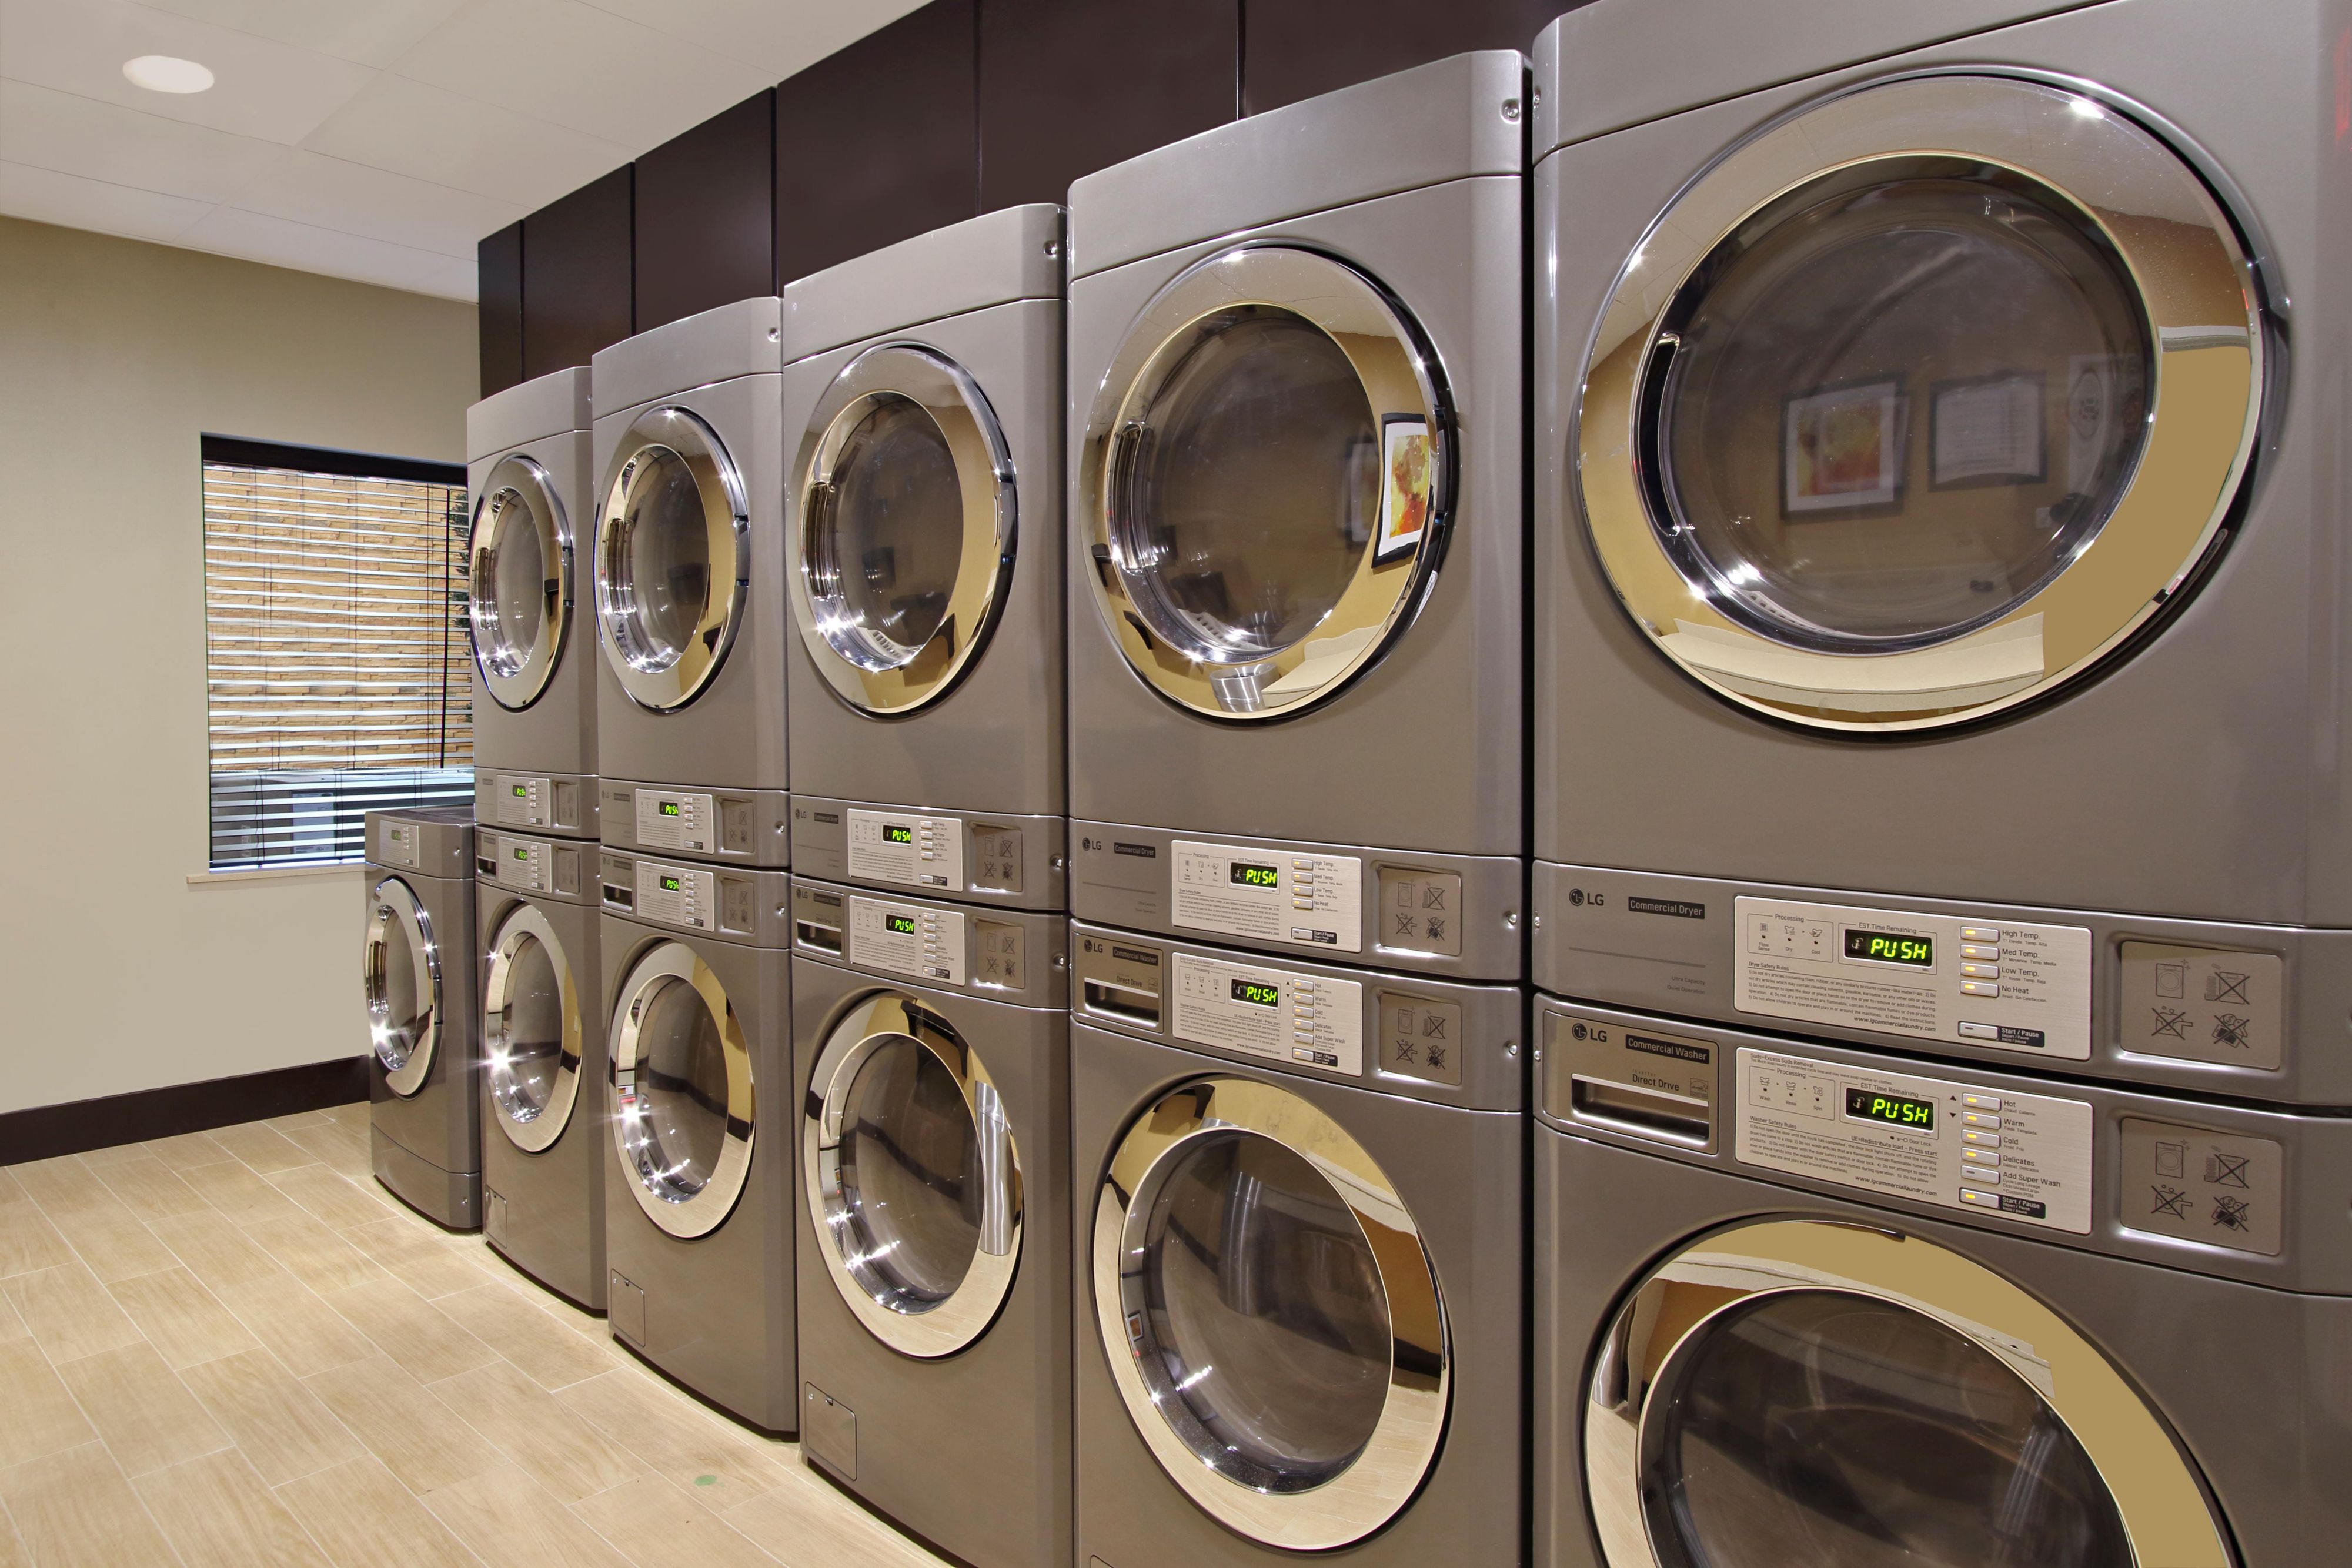 Take advantage of our complimentary washer and dryer for any stays.